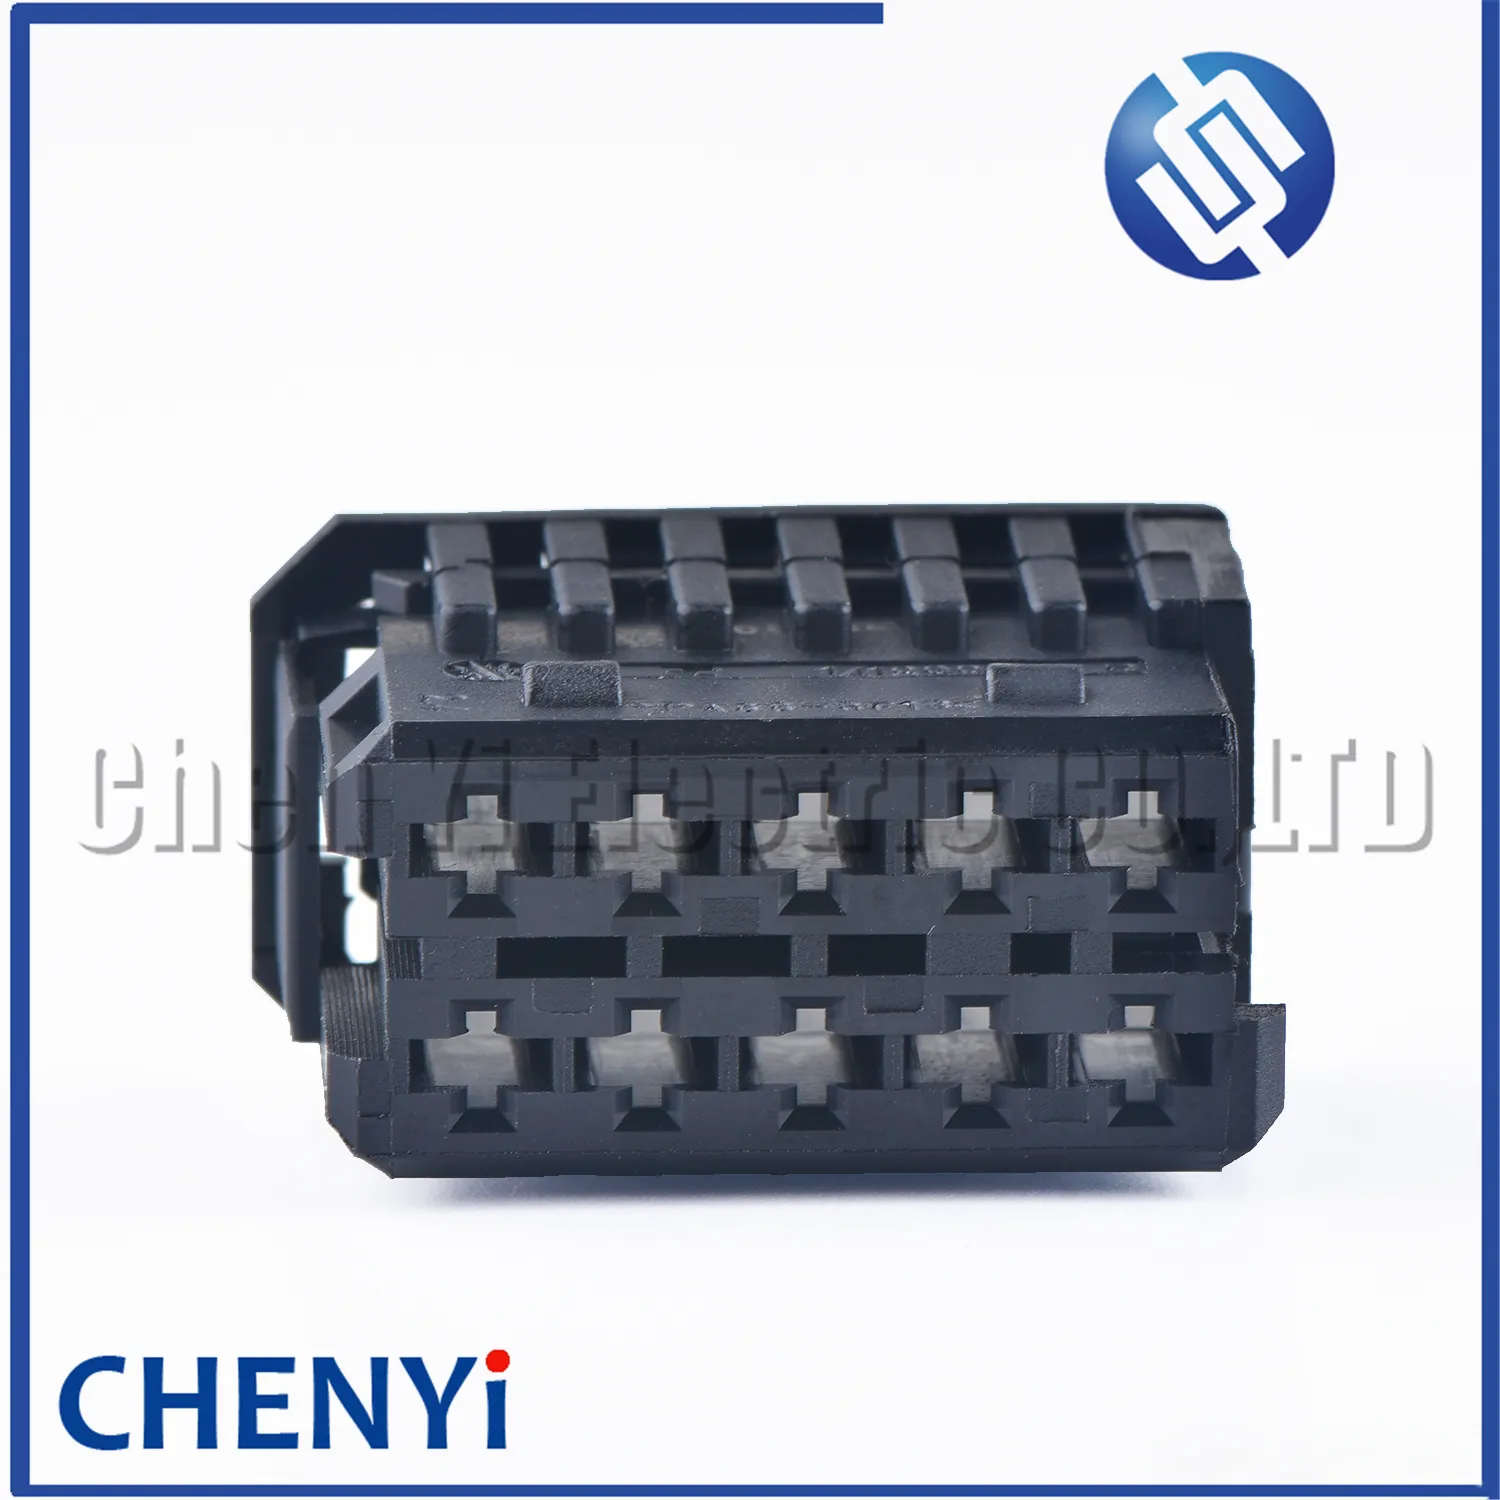 10 Pin 2.8 Series female Automobile Unsealed Connetor 1418994-1 With Terminals The truck Wiring Socket Auto Parts plug